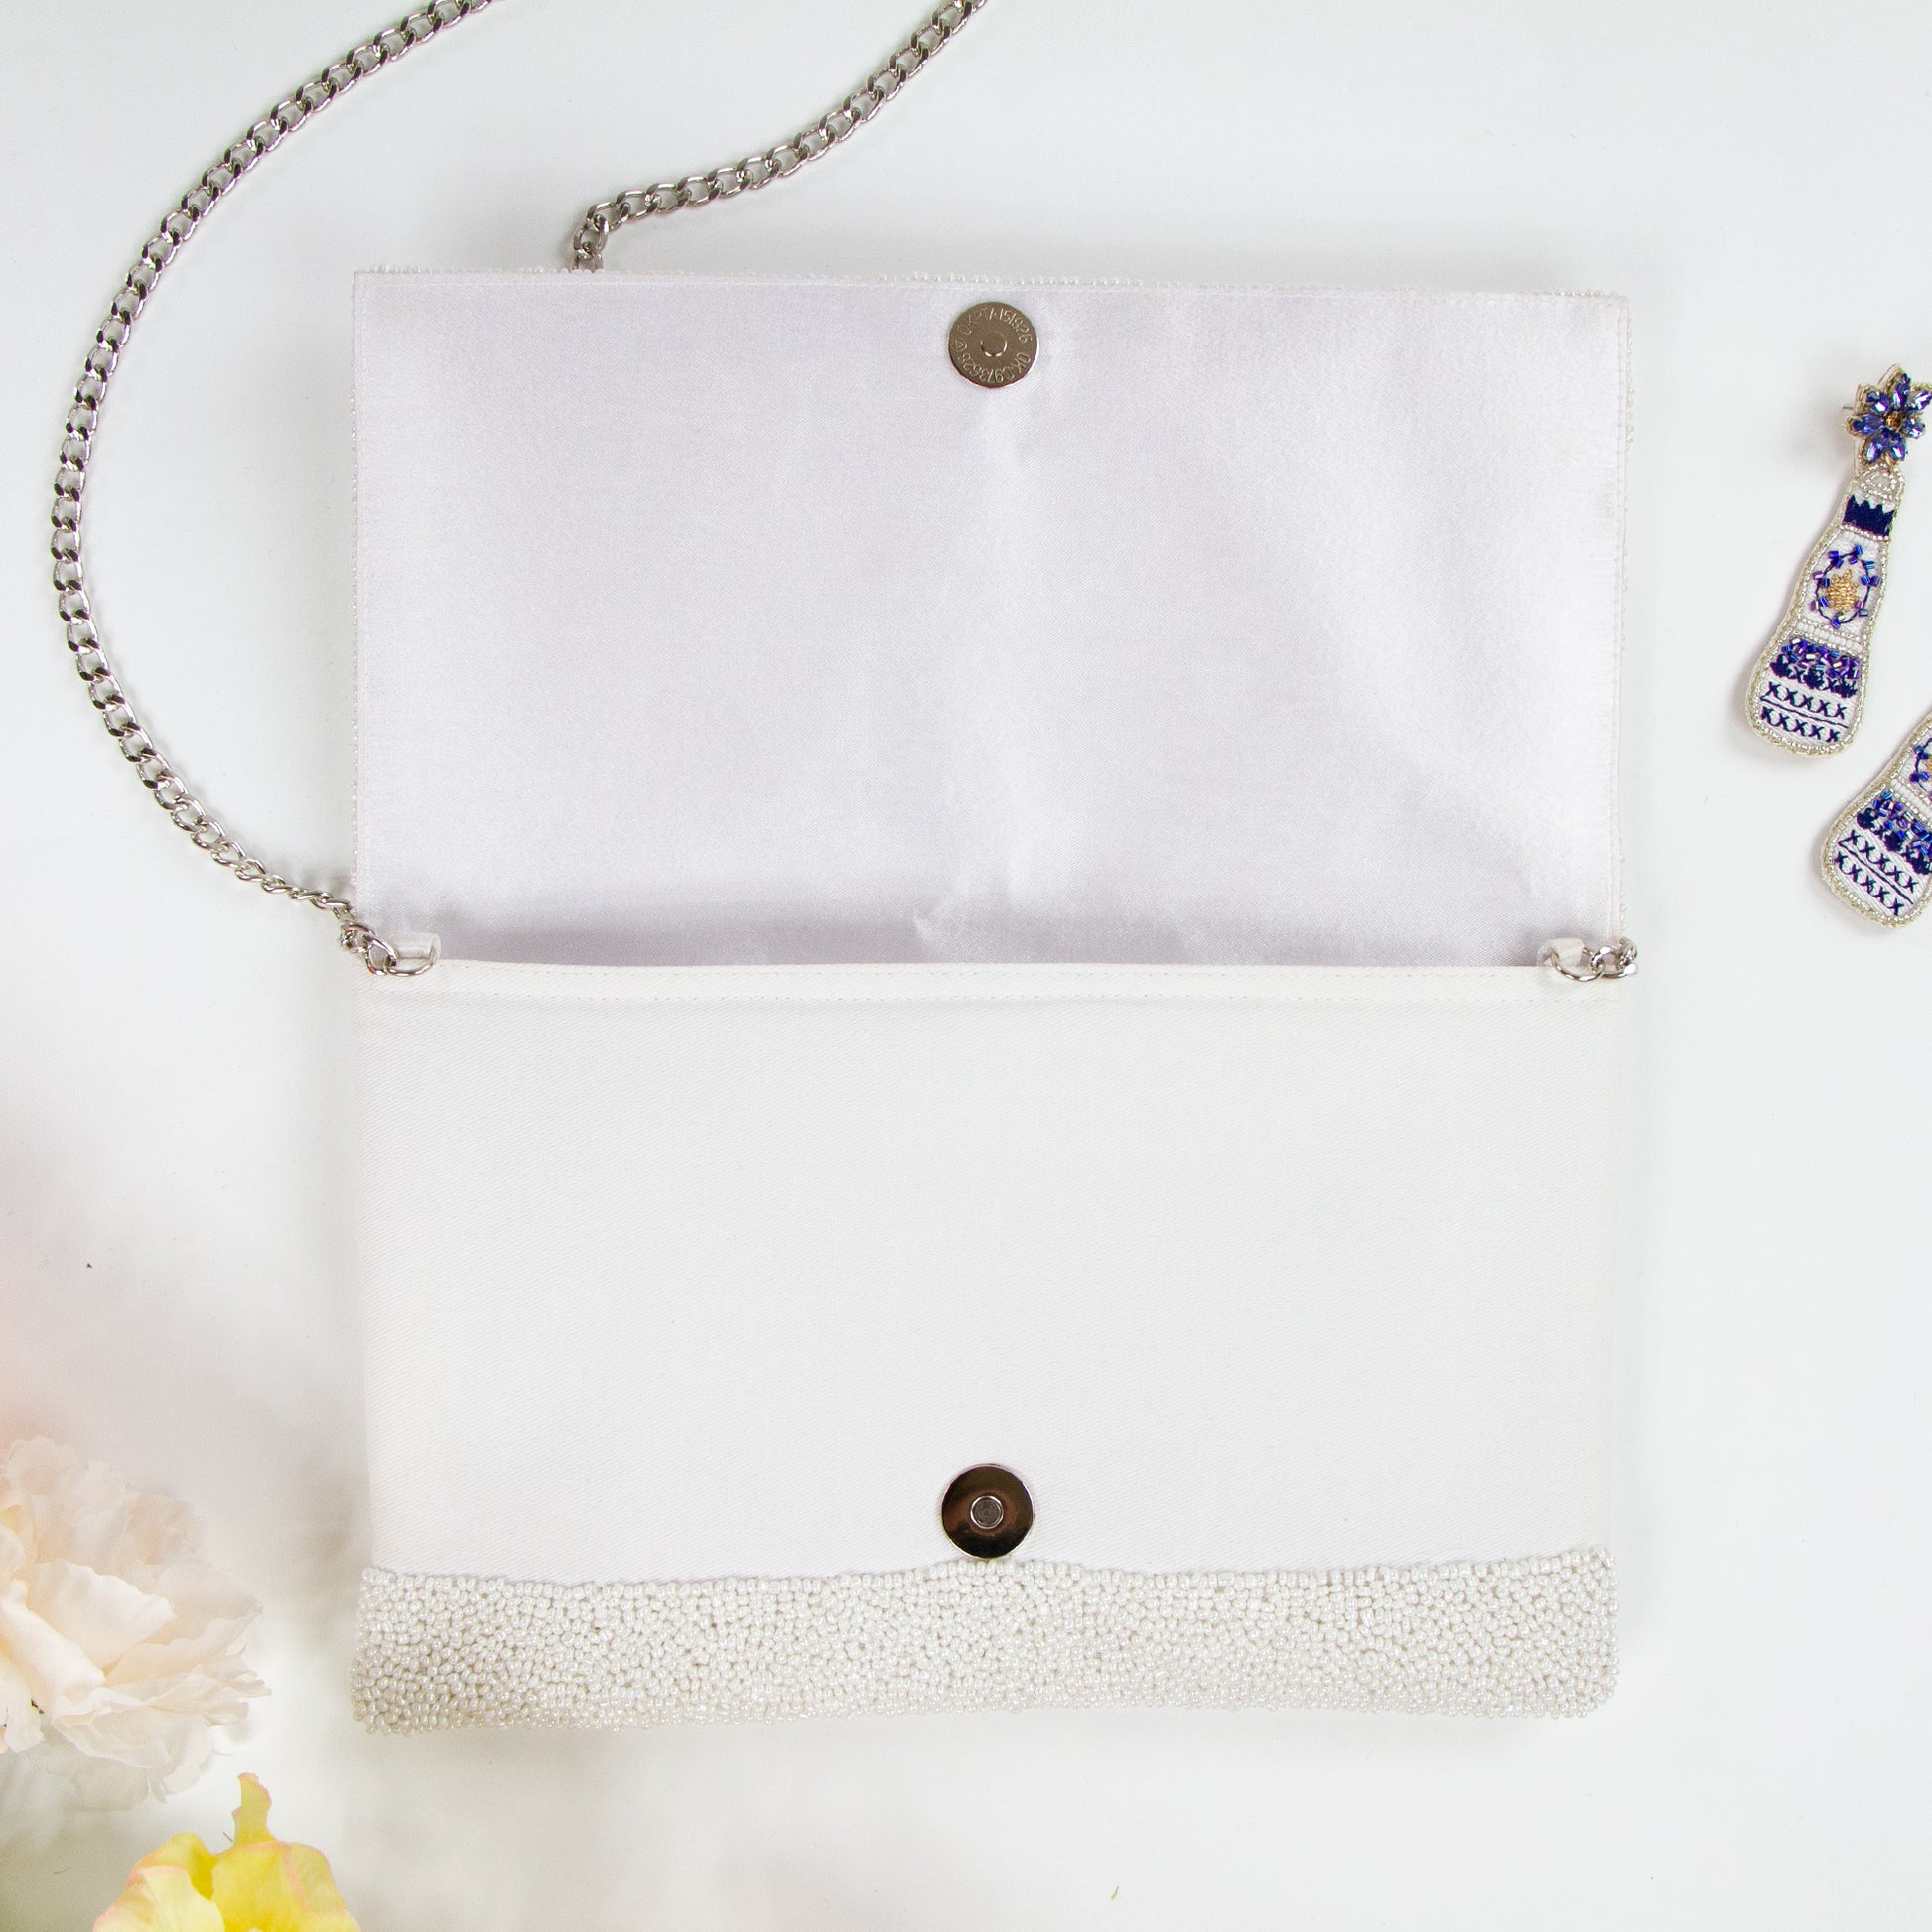 Elegant white MRS Bridal Clutch, handcrafted with intricate beading and a distinctive pattern. Made from durable canvas with a satin finish inside and secured with a magnetic snap closure. Measuring 10 x 6 x 1 inches, this bridal clutch is perfect for holding wedding day essentials and showcases the unique charm and variations of handmade items.